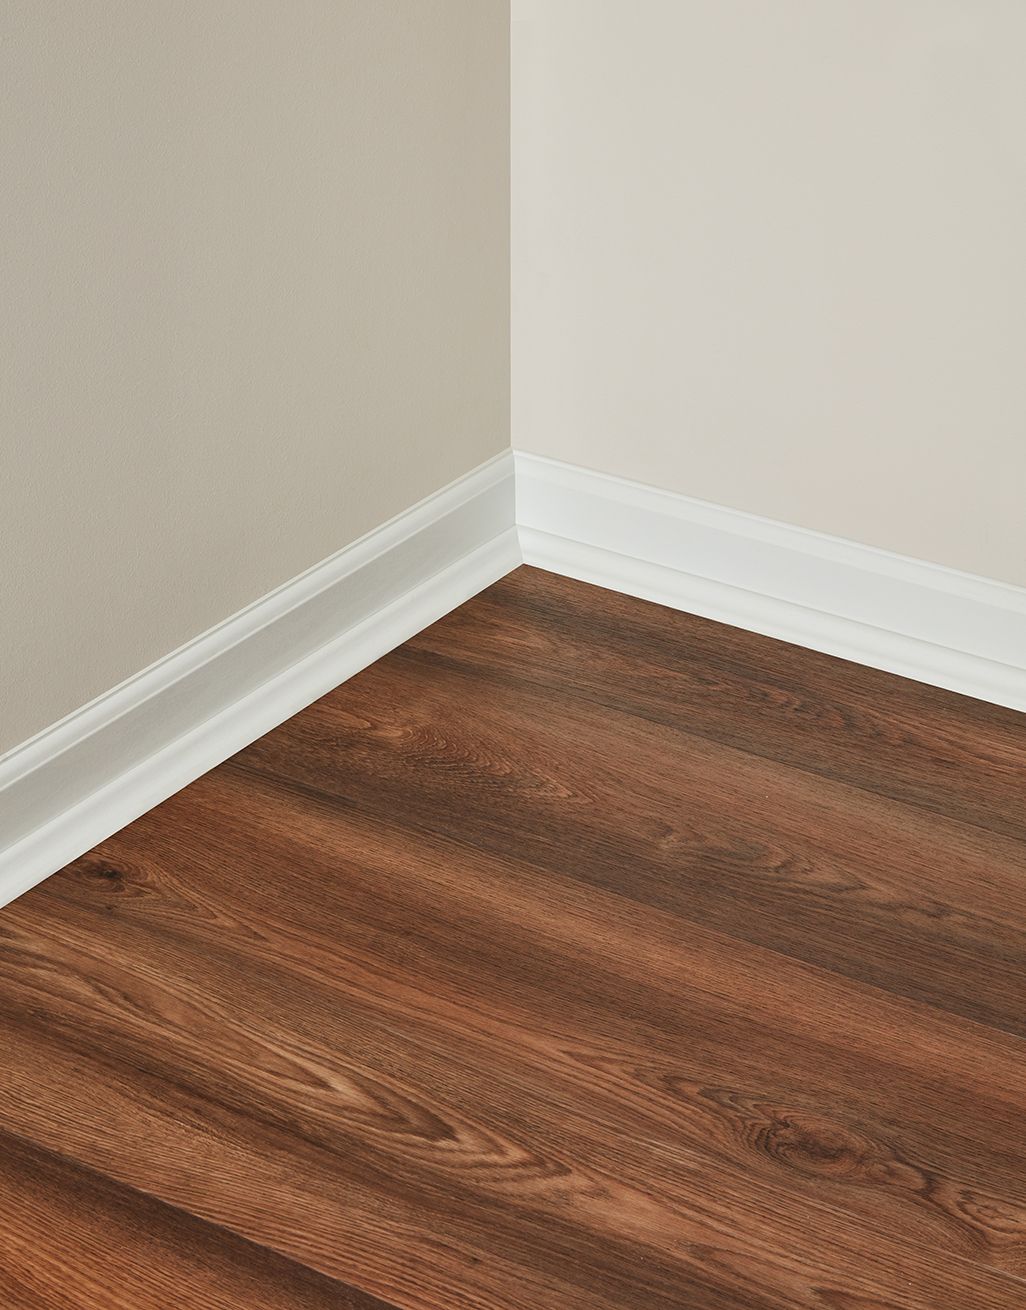 Evocore Cloudy White Oak Scotia Beading, Pictures Of Laminate Flooring With Beading